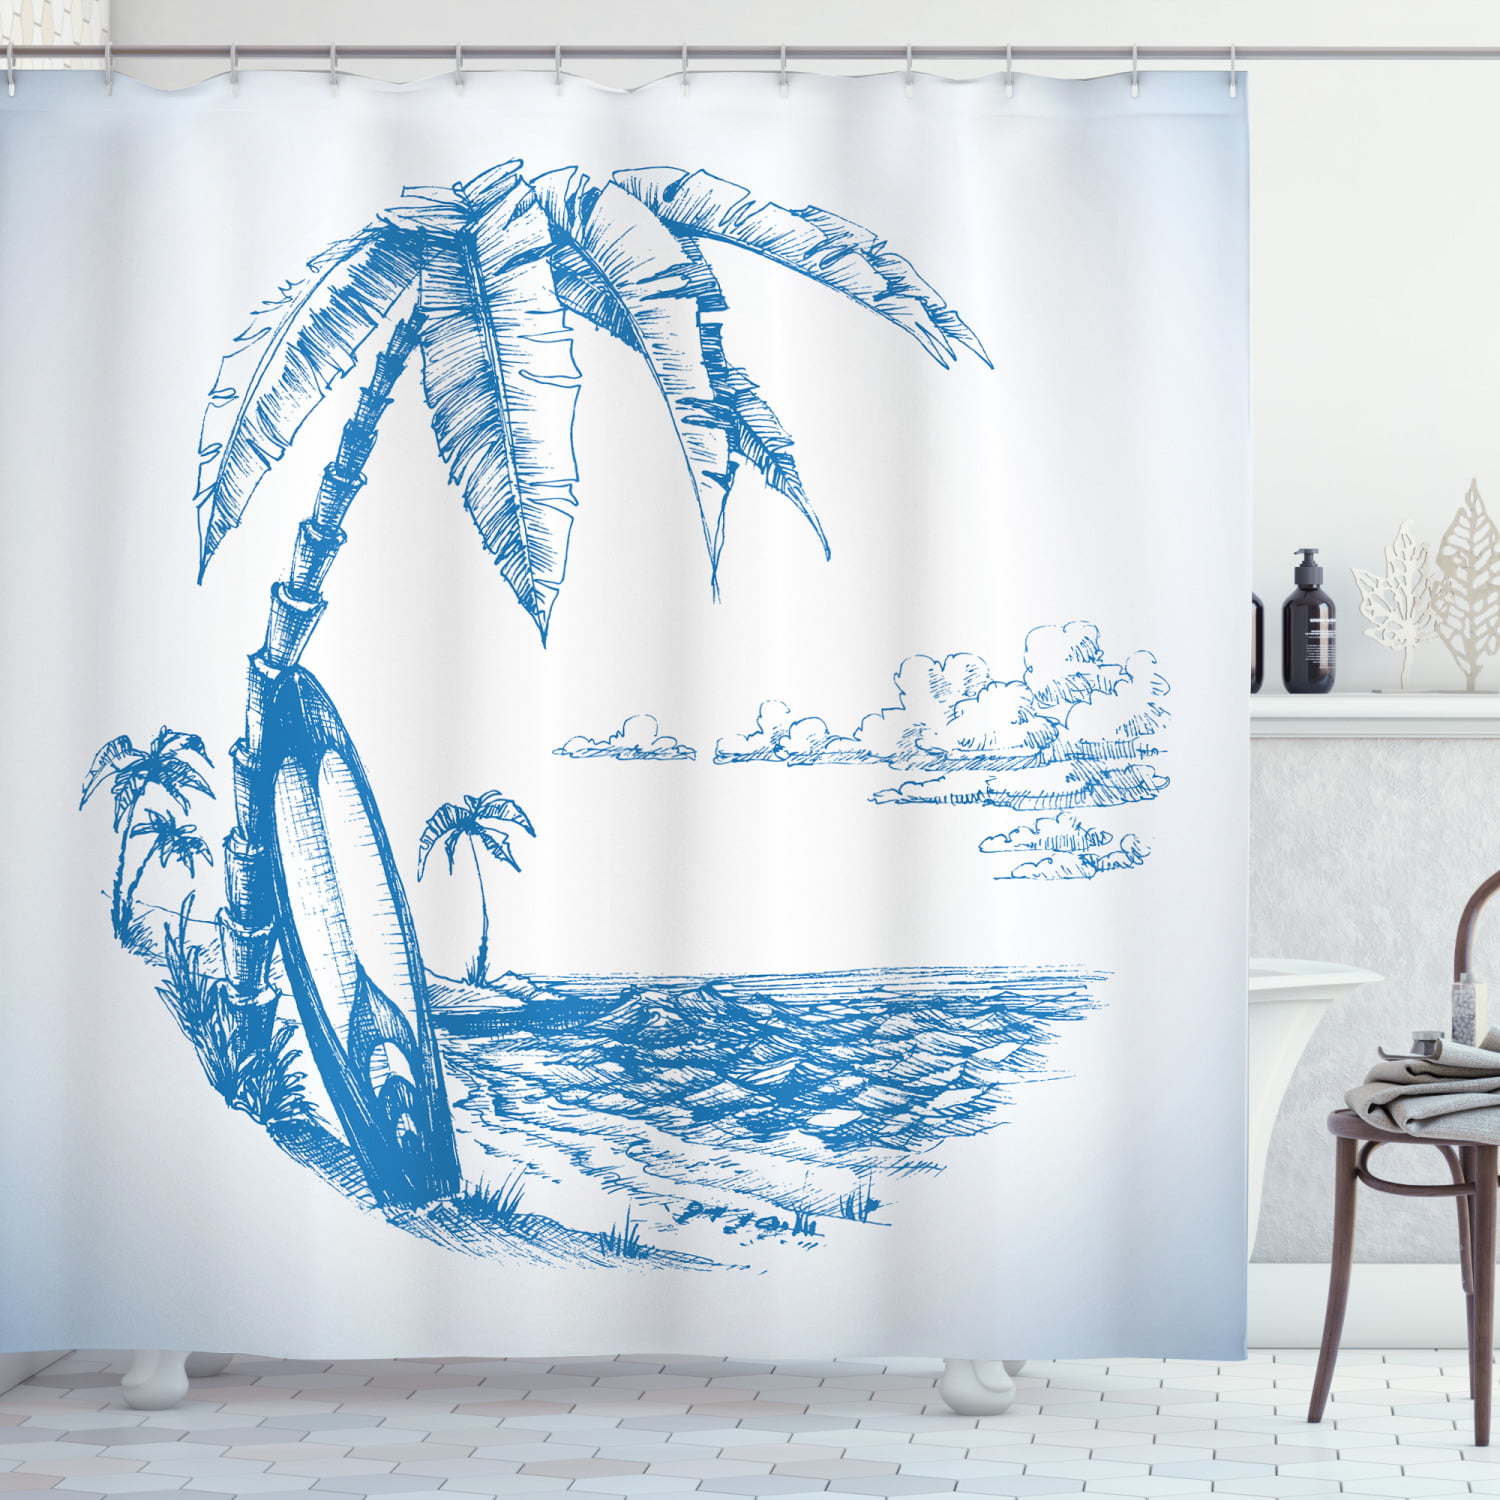 72" Waterproof Fabric Shower Curtain Set Hand Drawn Tropical Palm Trees Surfing 